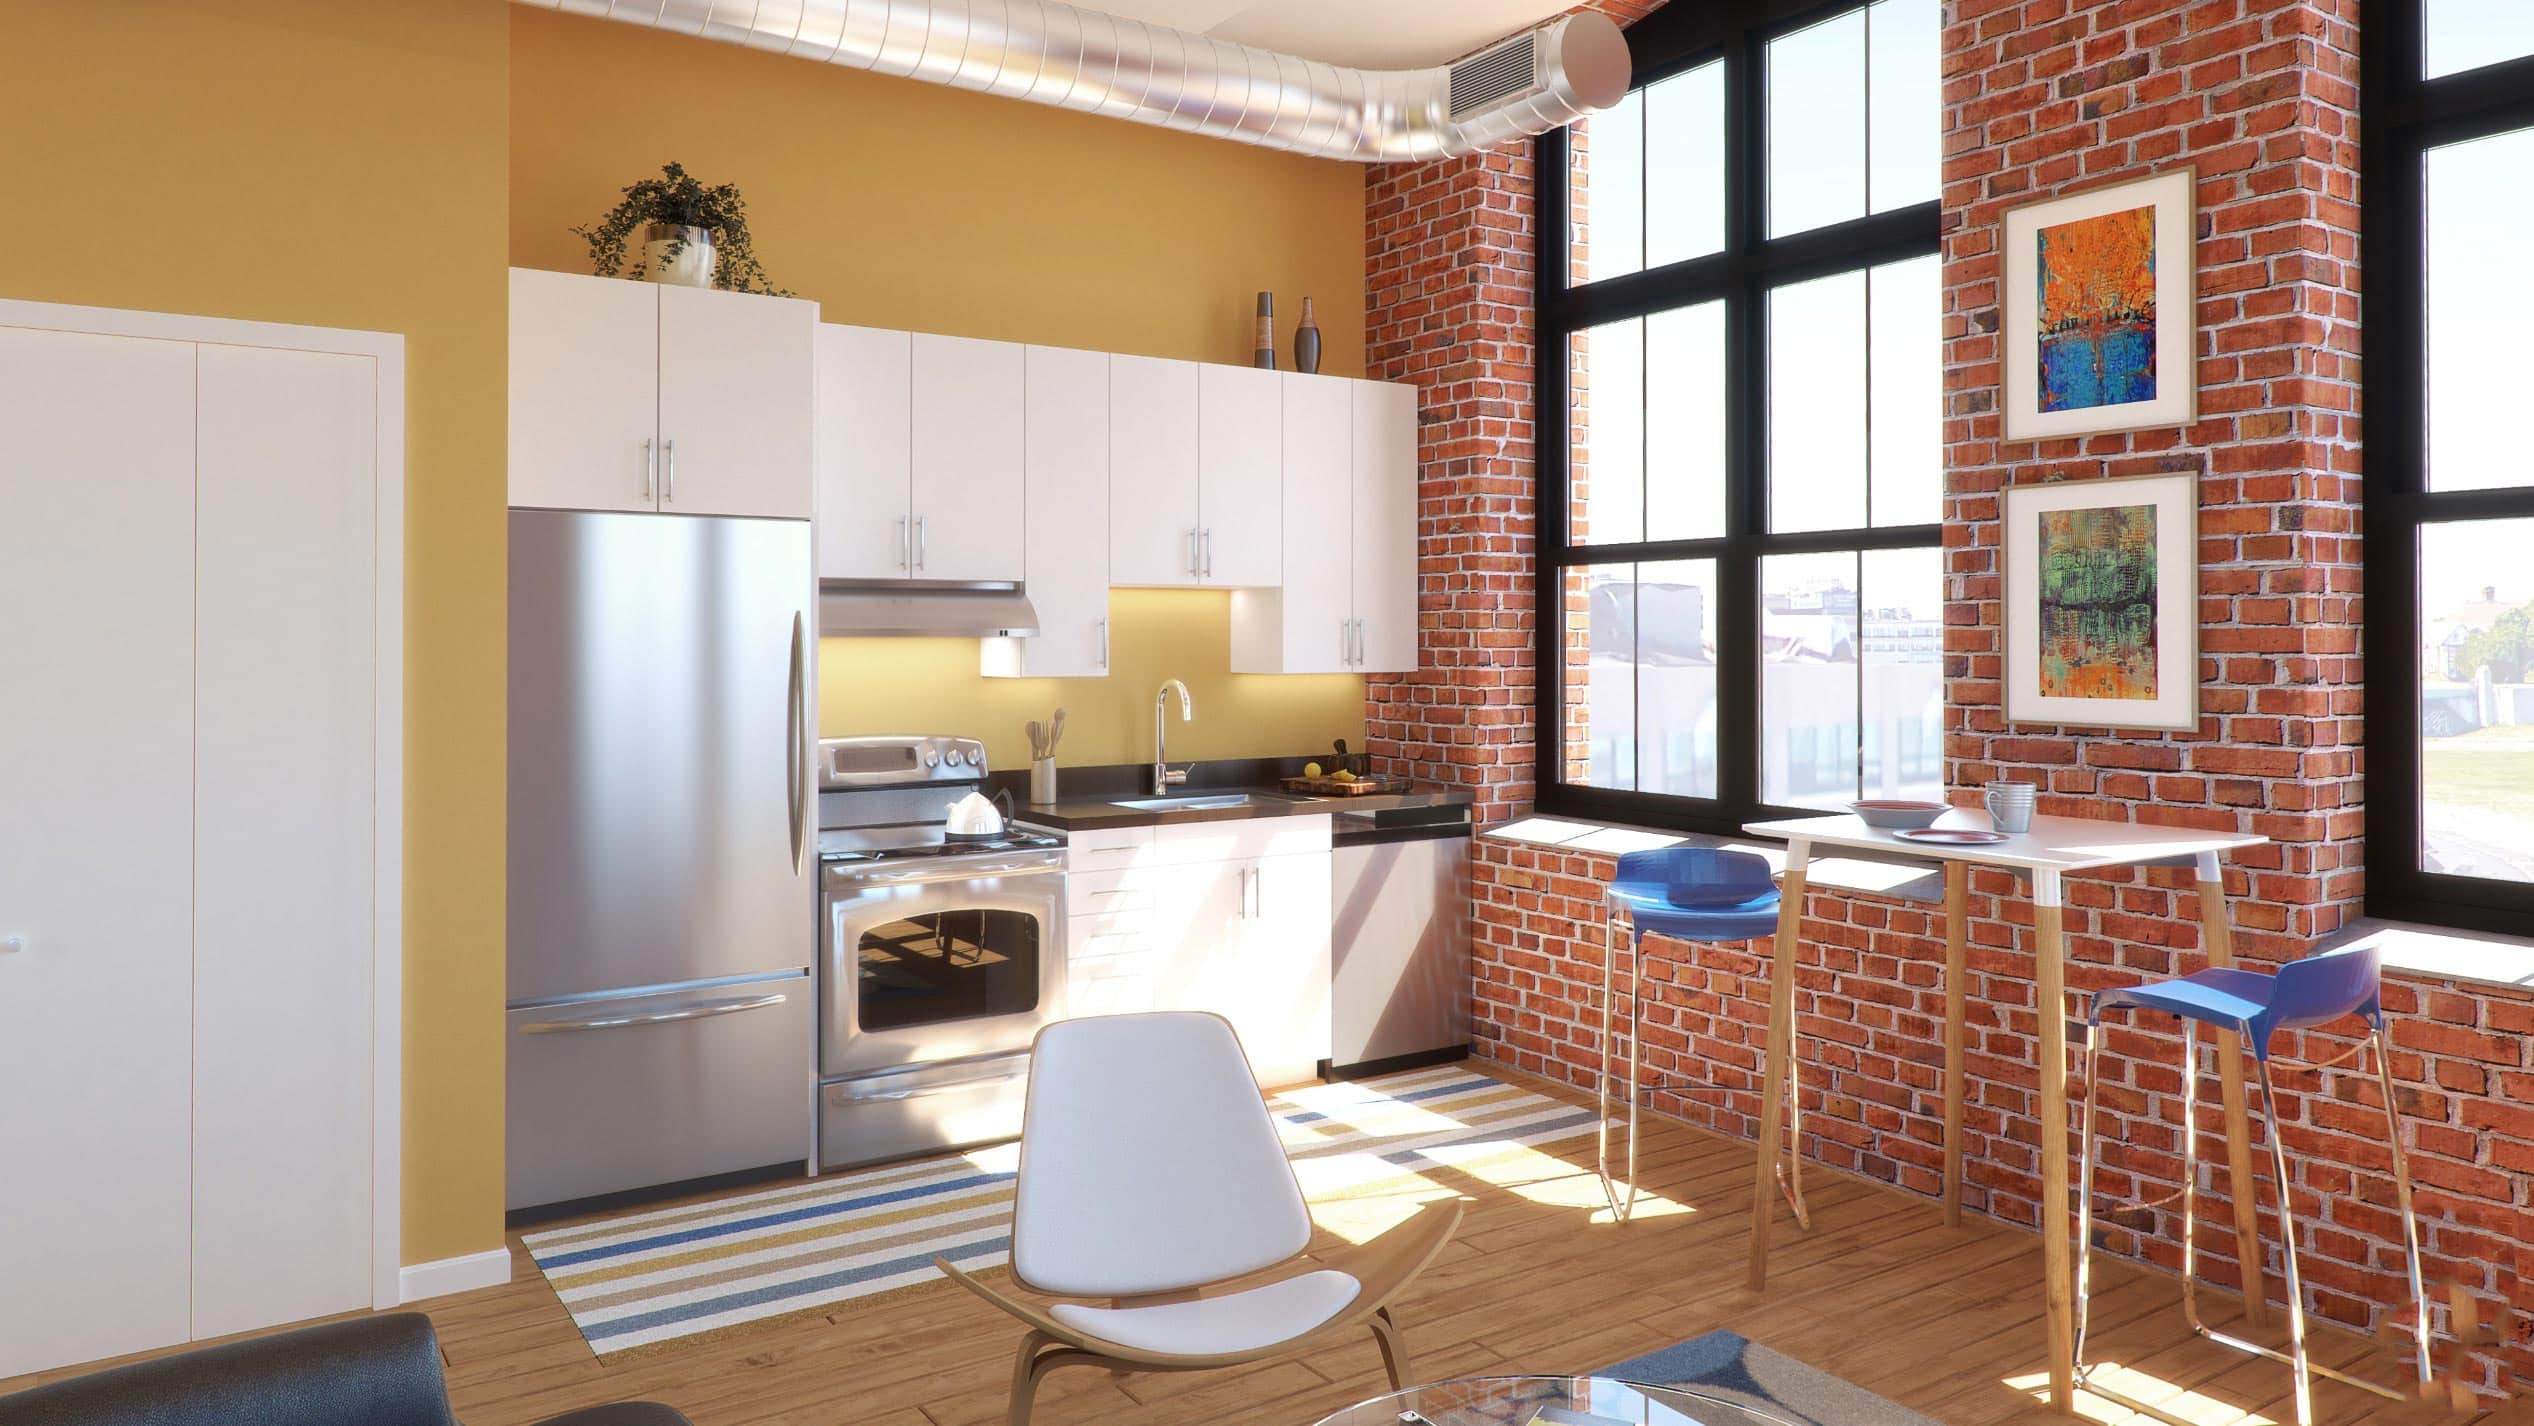 A historical building reborn into a modern living experience. Exposed brick, natural light and top amenities await you.